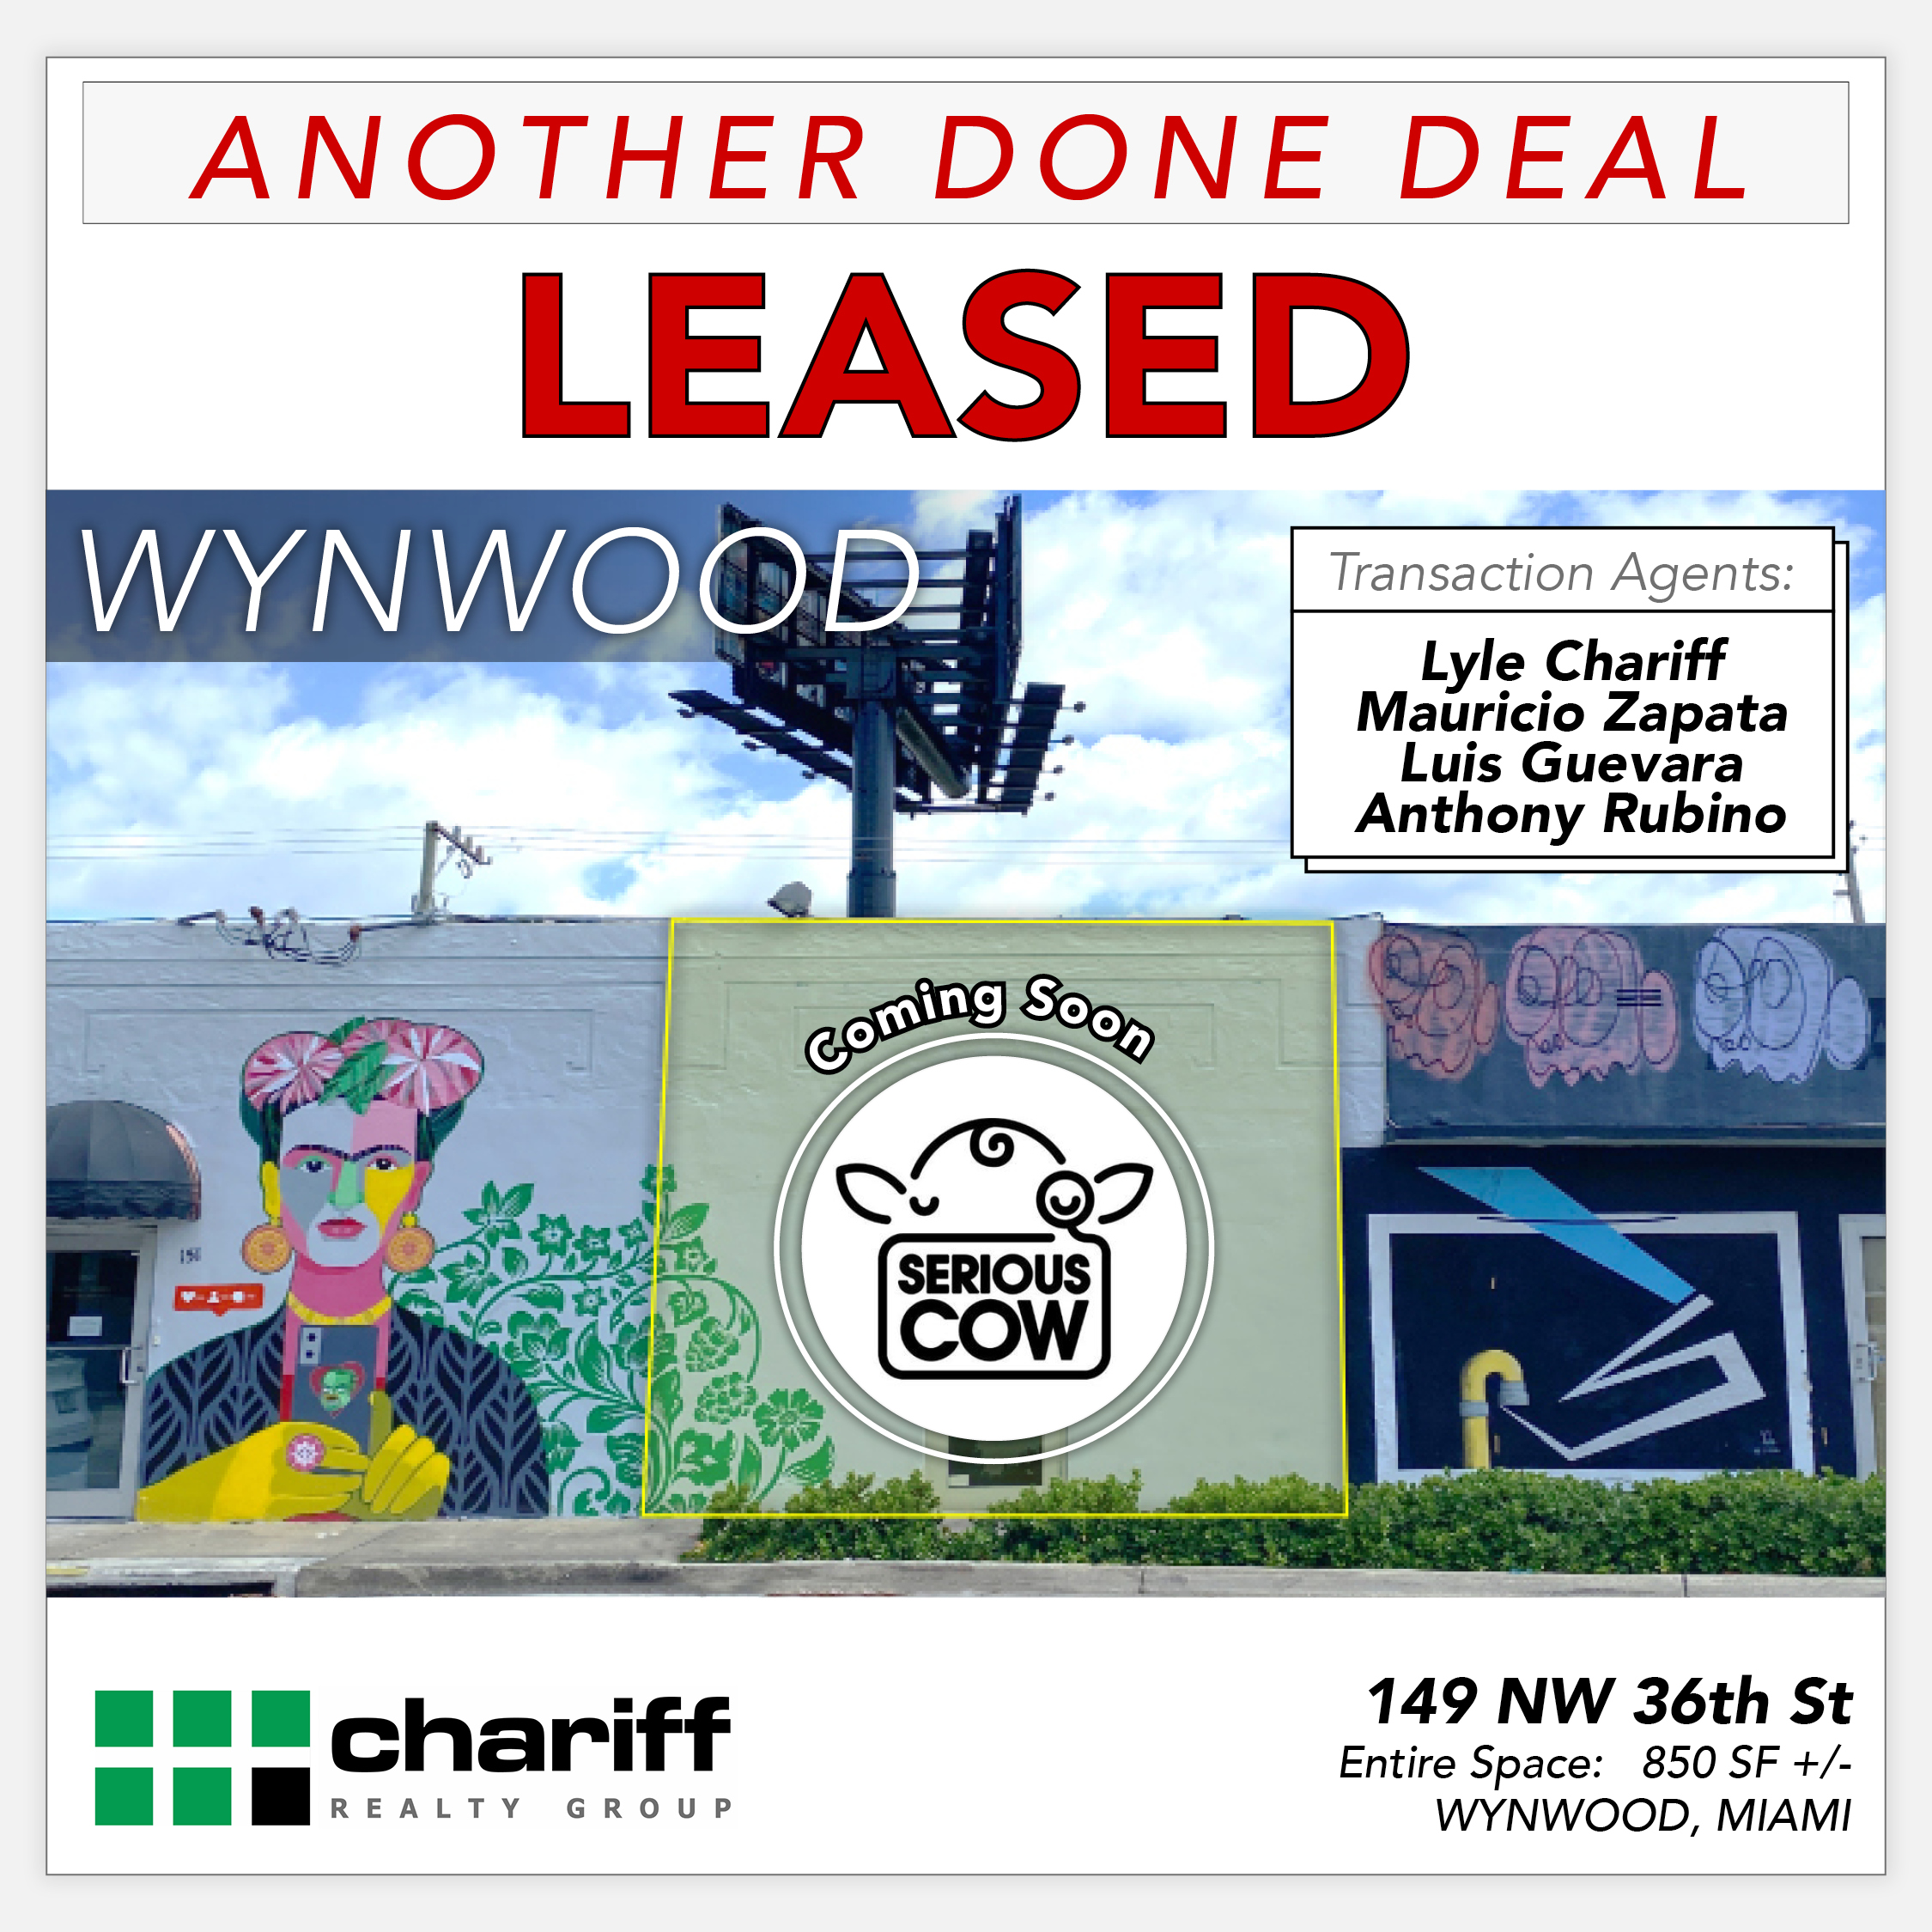 149 NW 36th St - Another Done Deal- Leased -Wynwood-Miami-Florida-33127-Chariff Realty Group